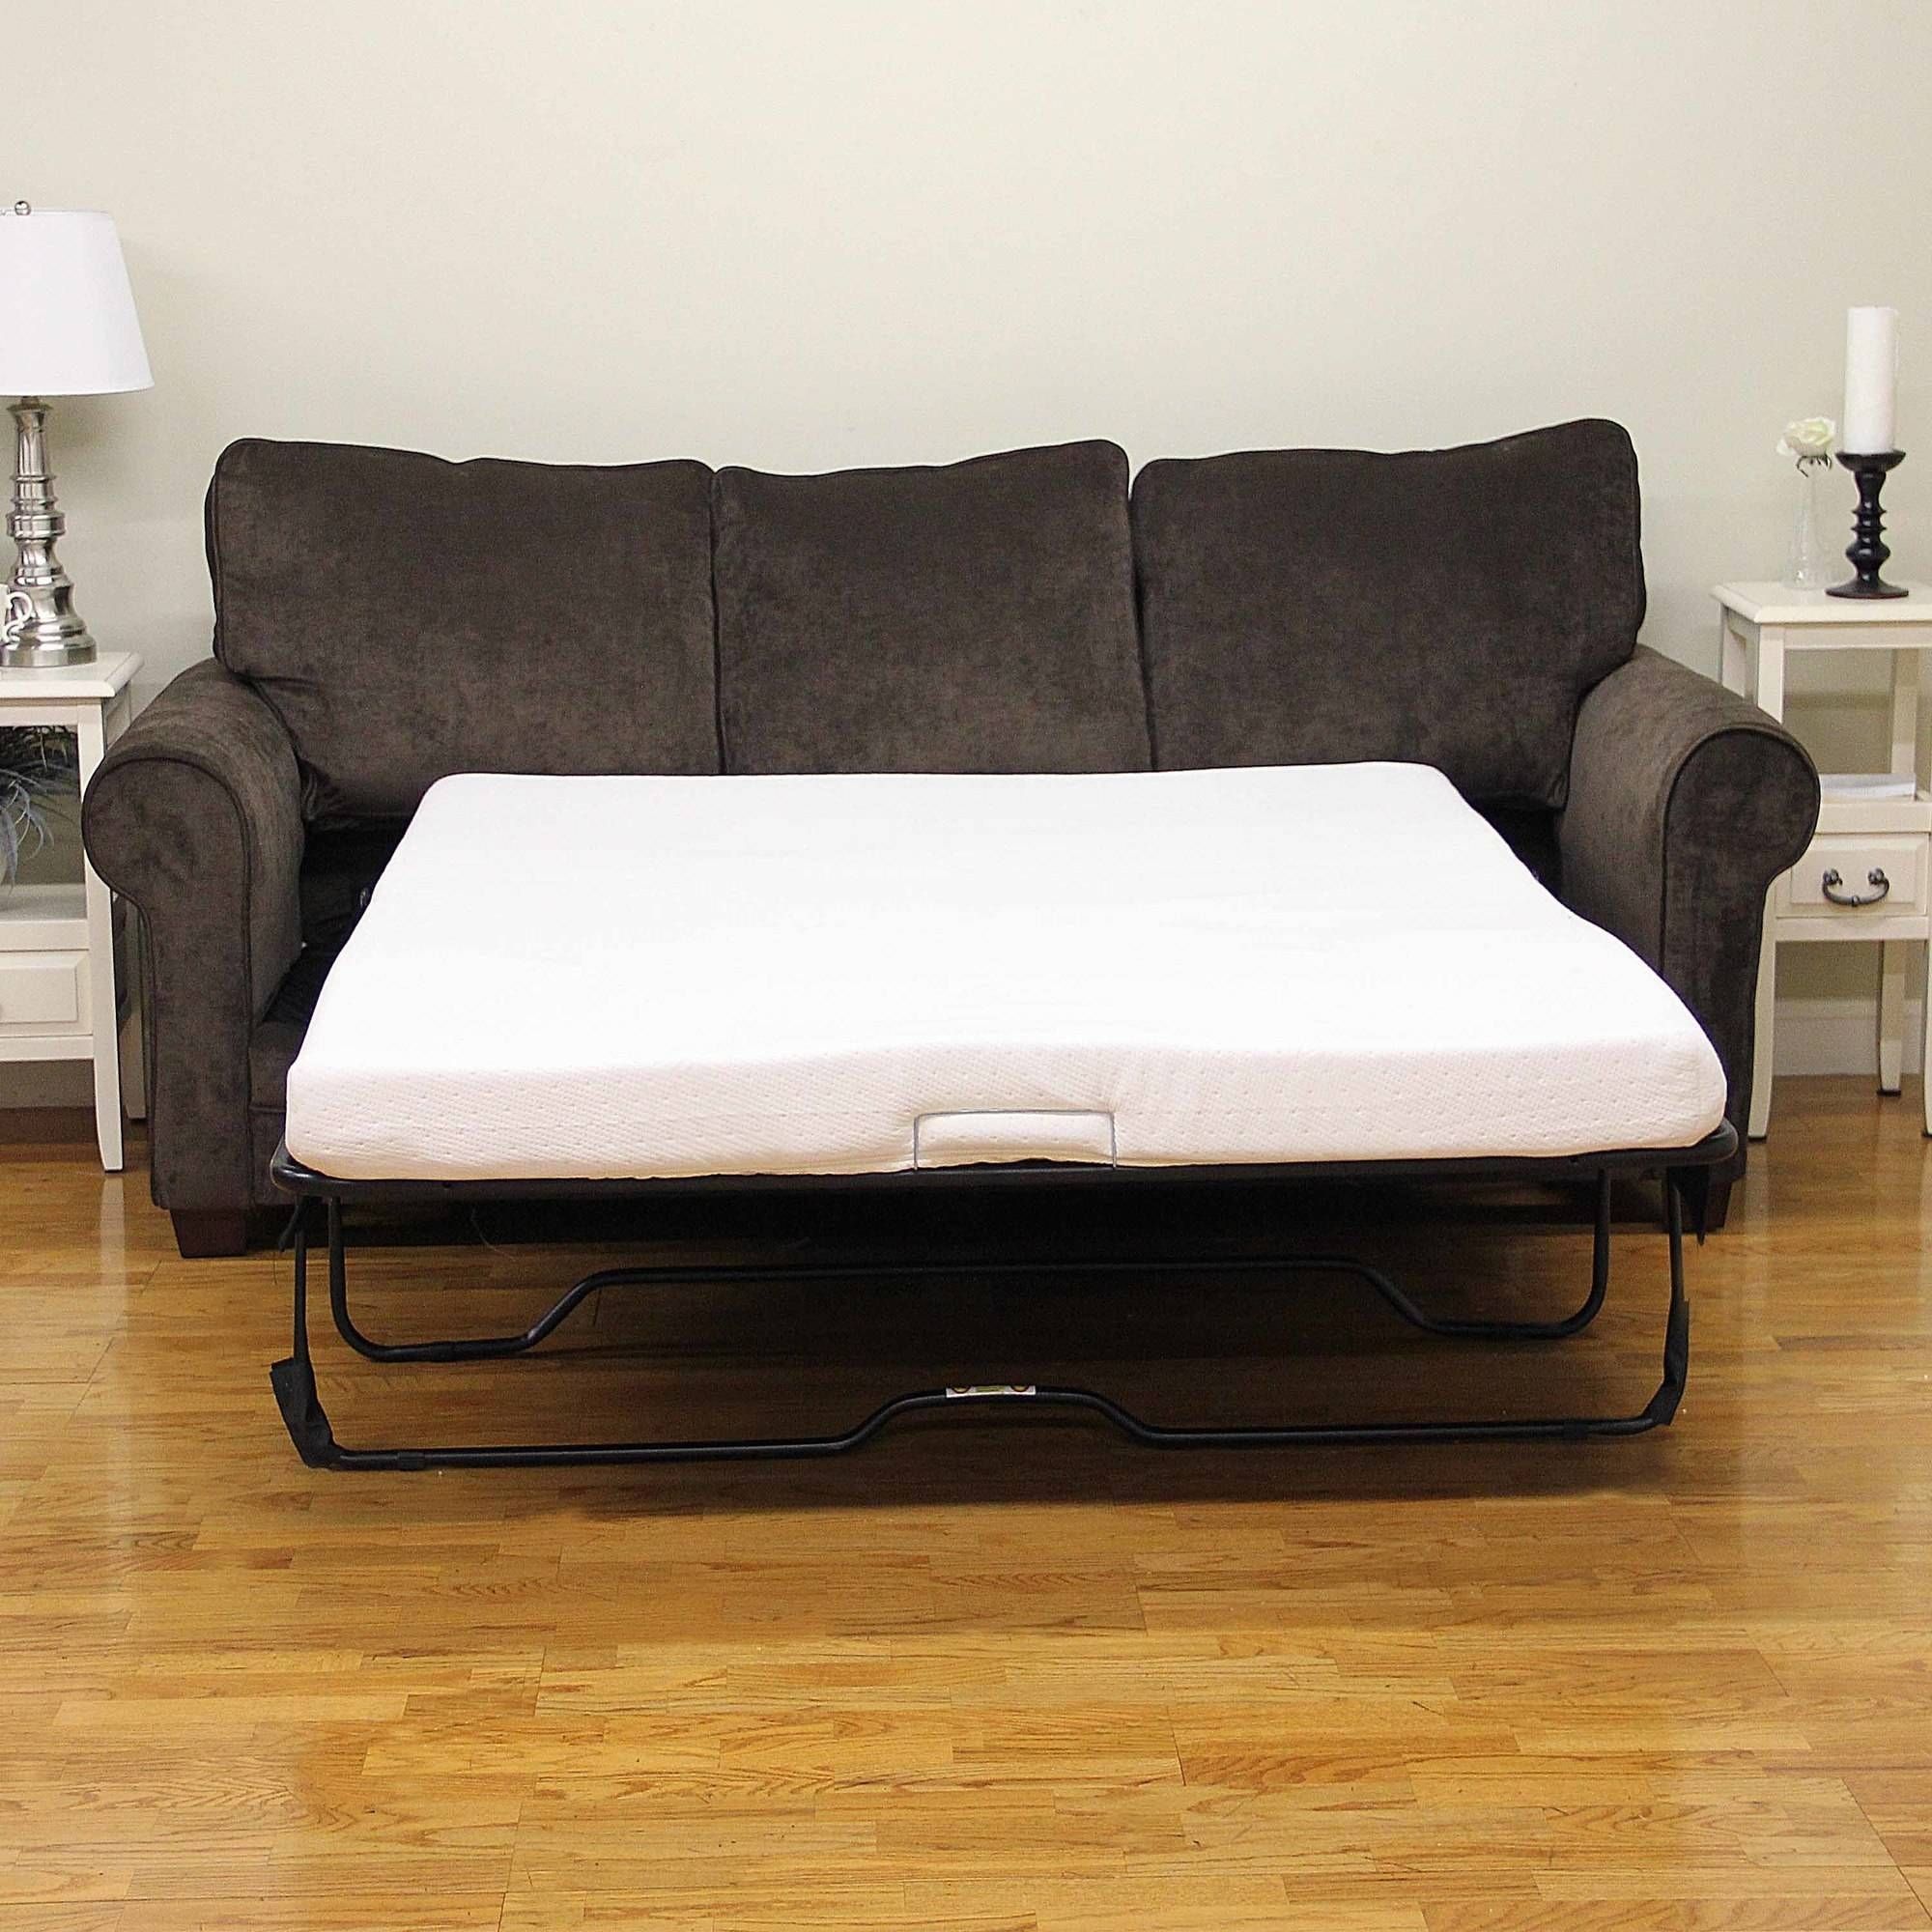 12 Collection of Cool Sofa Beds